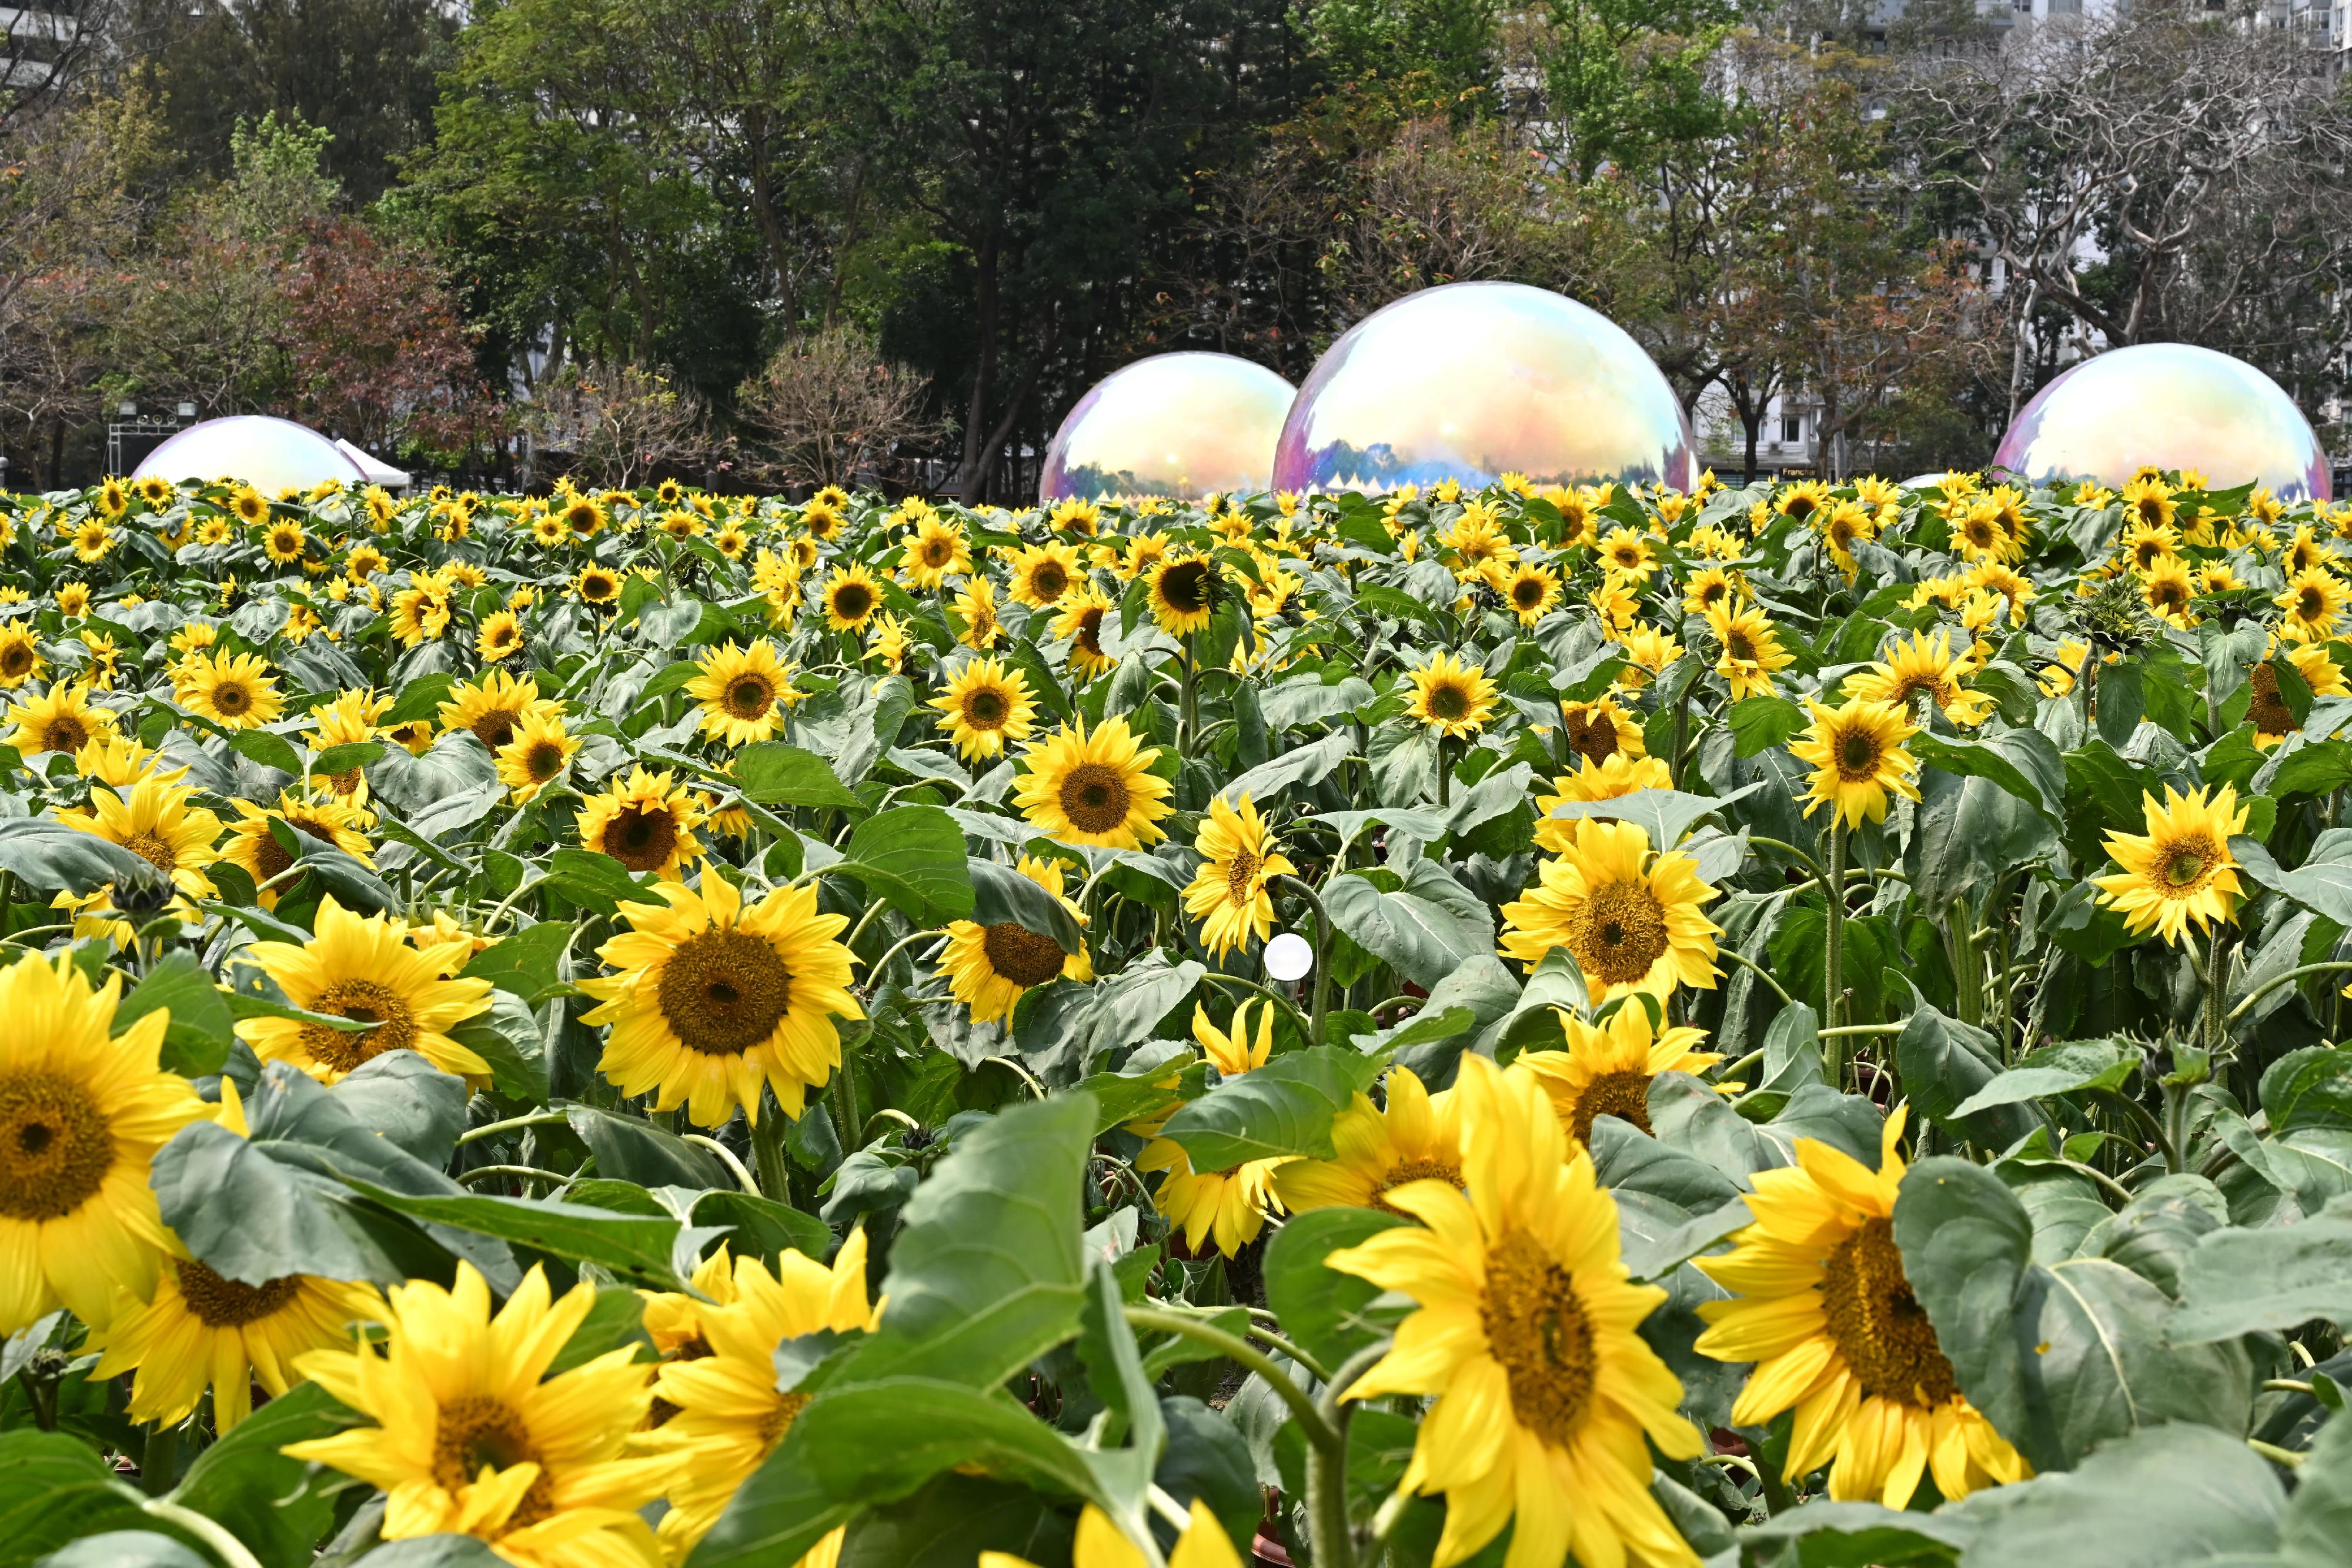 The Hong Kong Flower Show 2024 will be held at Victoria Park from tomorrow (March 15) until March 24. This year's flower show features "Floral Joy Around Town" as the main theme and angelonia as the theme flower. A sunflower field on the central lawn forms a wondrous scene brimming with life.
